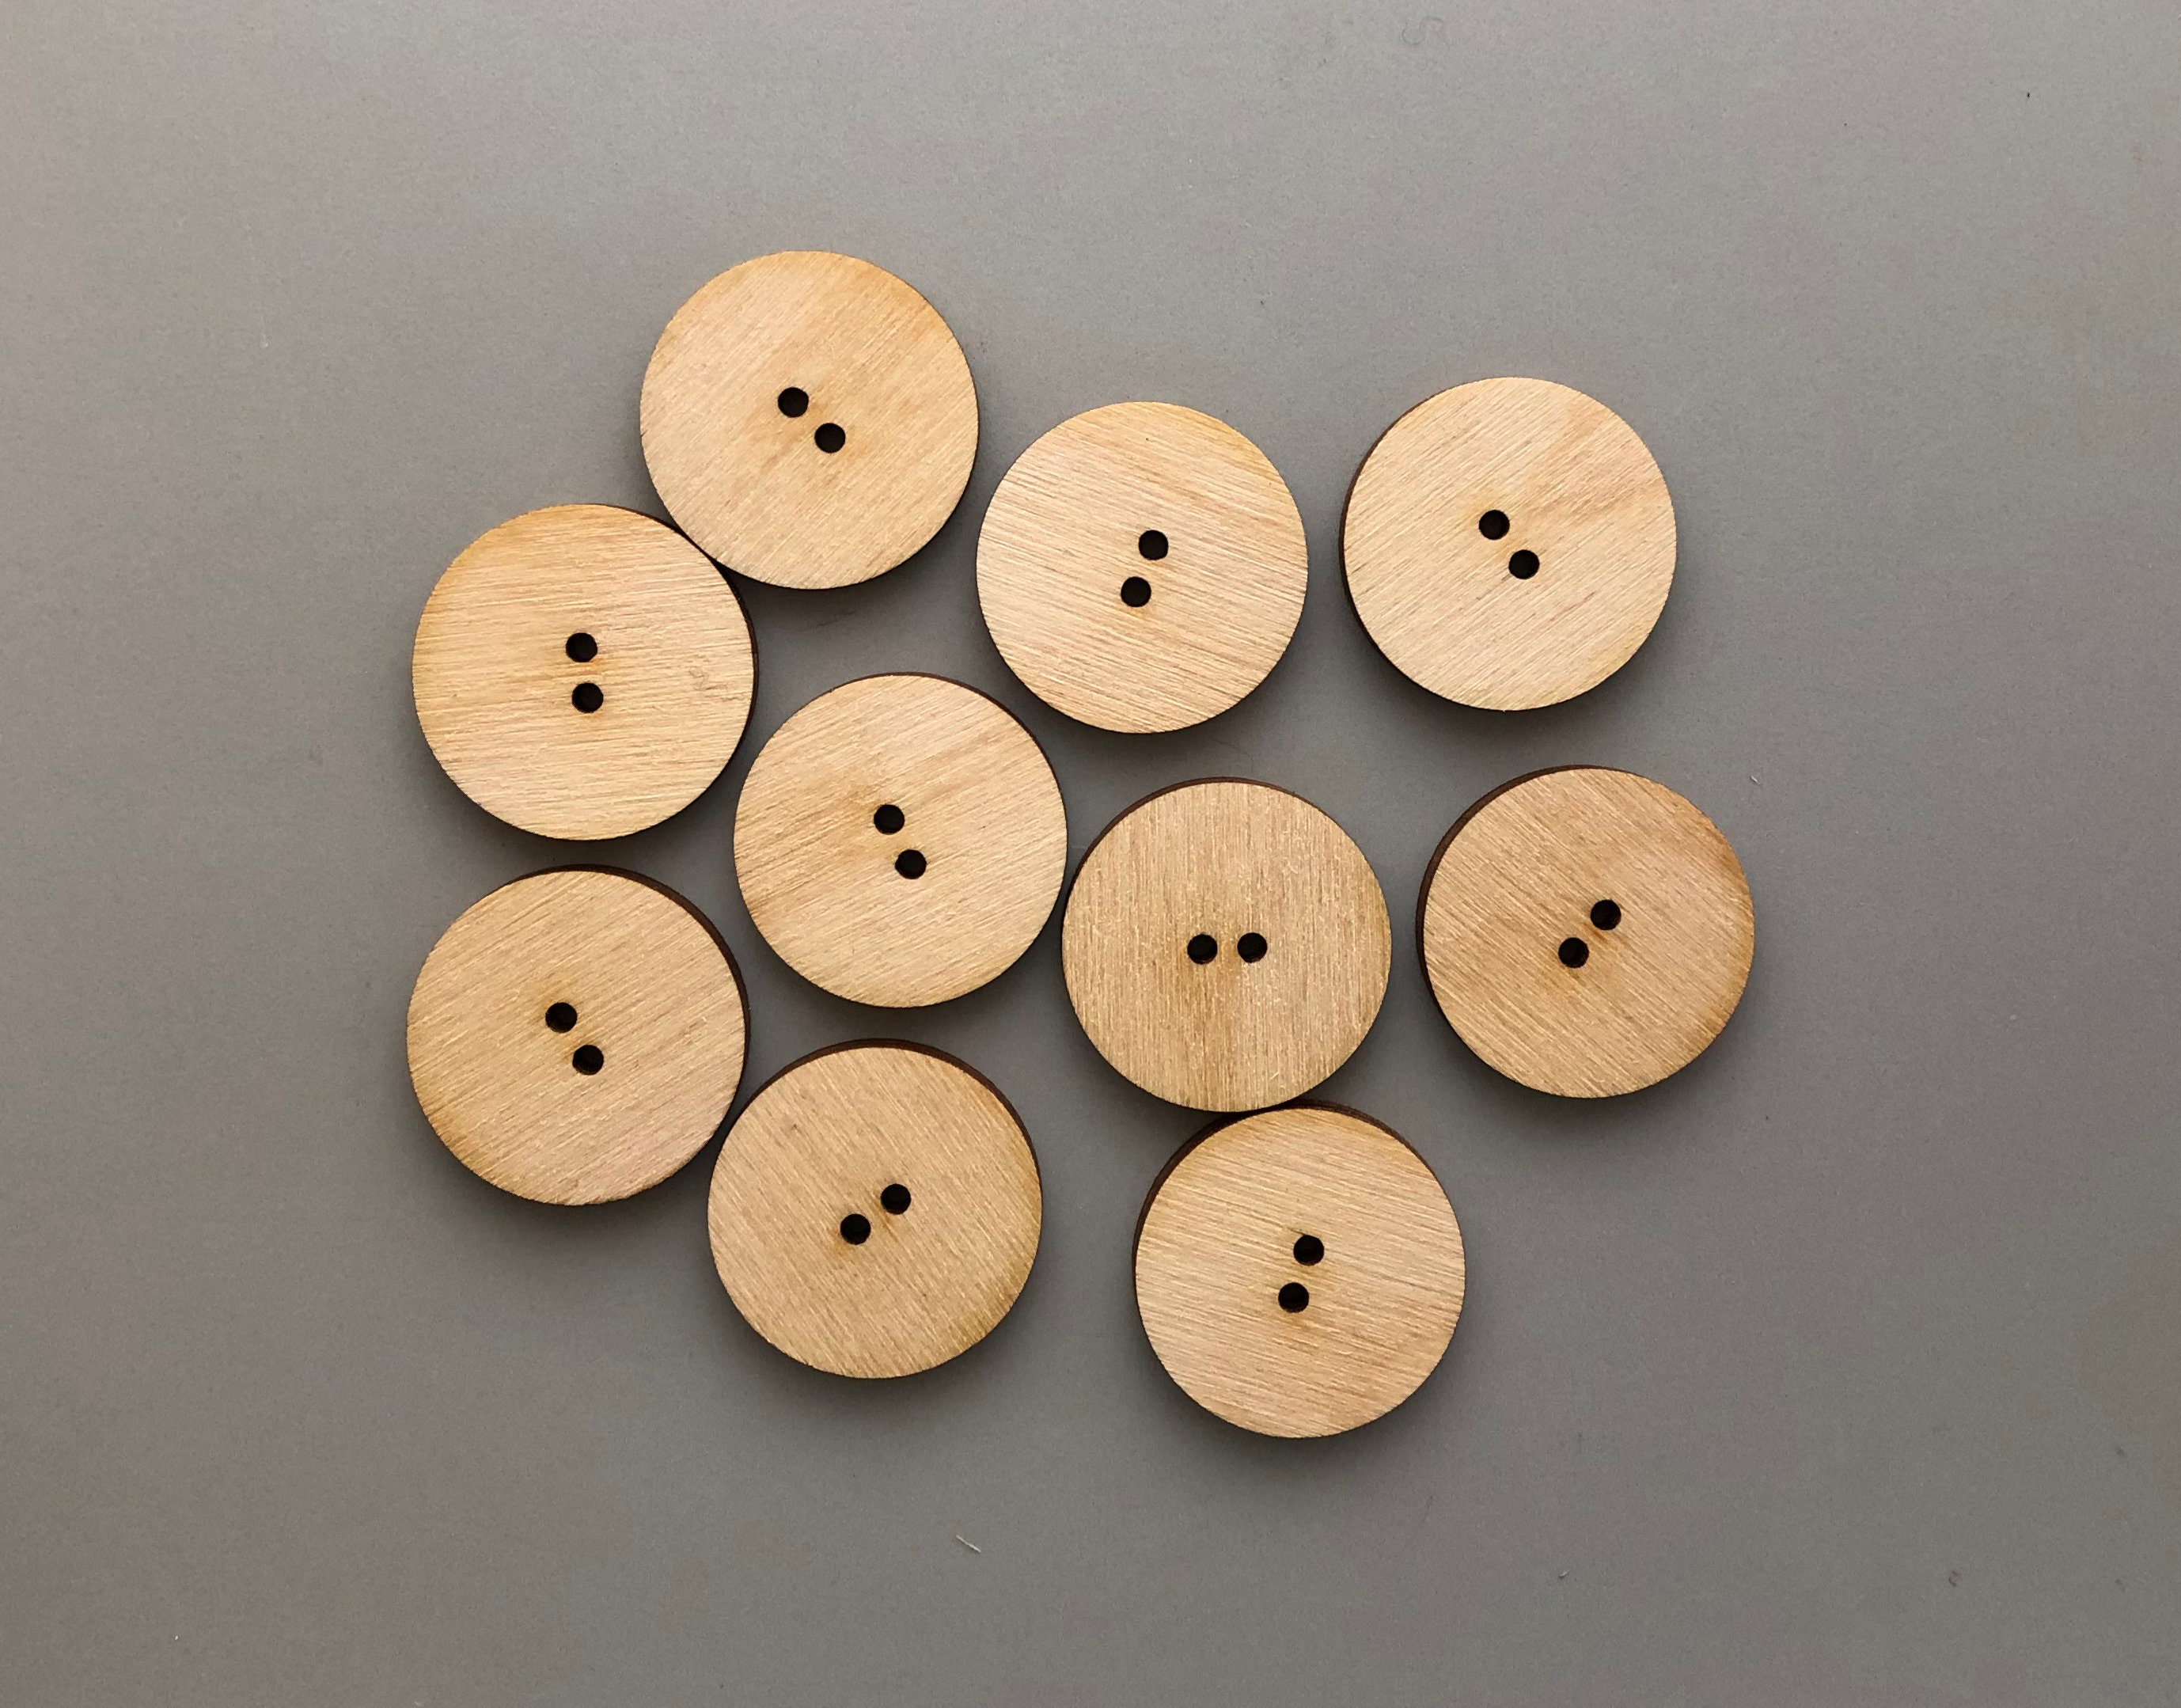 1 inch Wooden Buttons in Bulk Round Decorative Wood Buttons 4 Holes for Crafts Scrapbooking or Sewing and DIY Craft Pack 40 A664